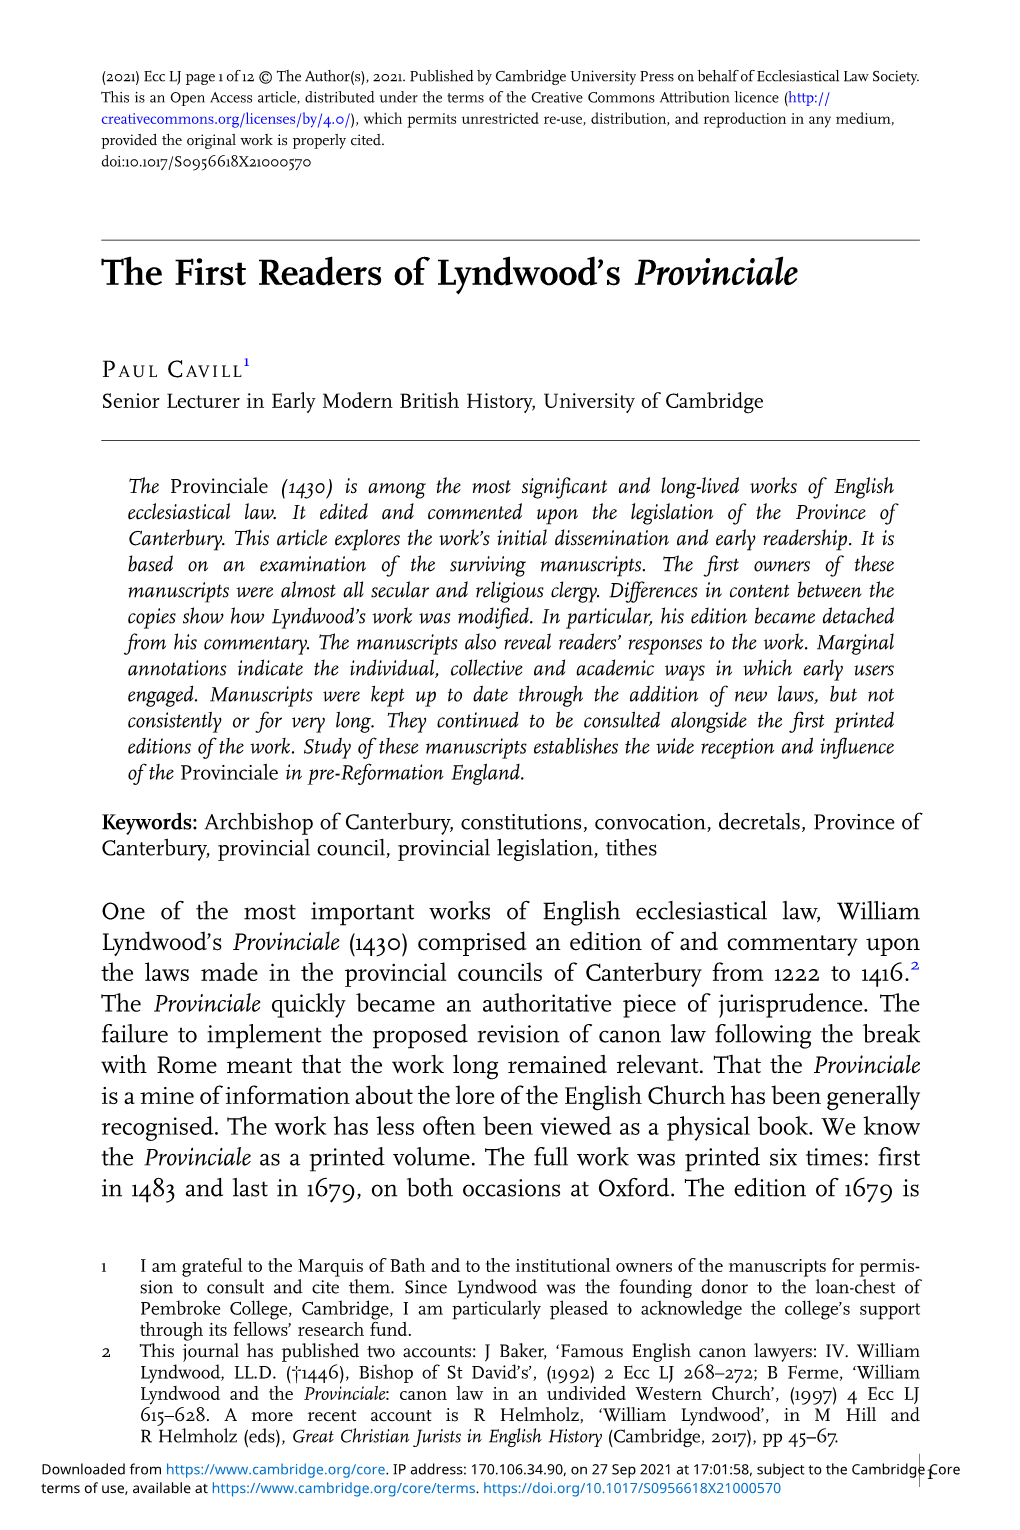 The First Readers of Lyndwood's Provinciale